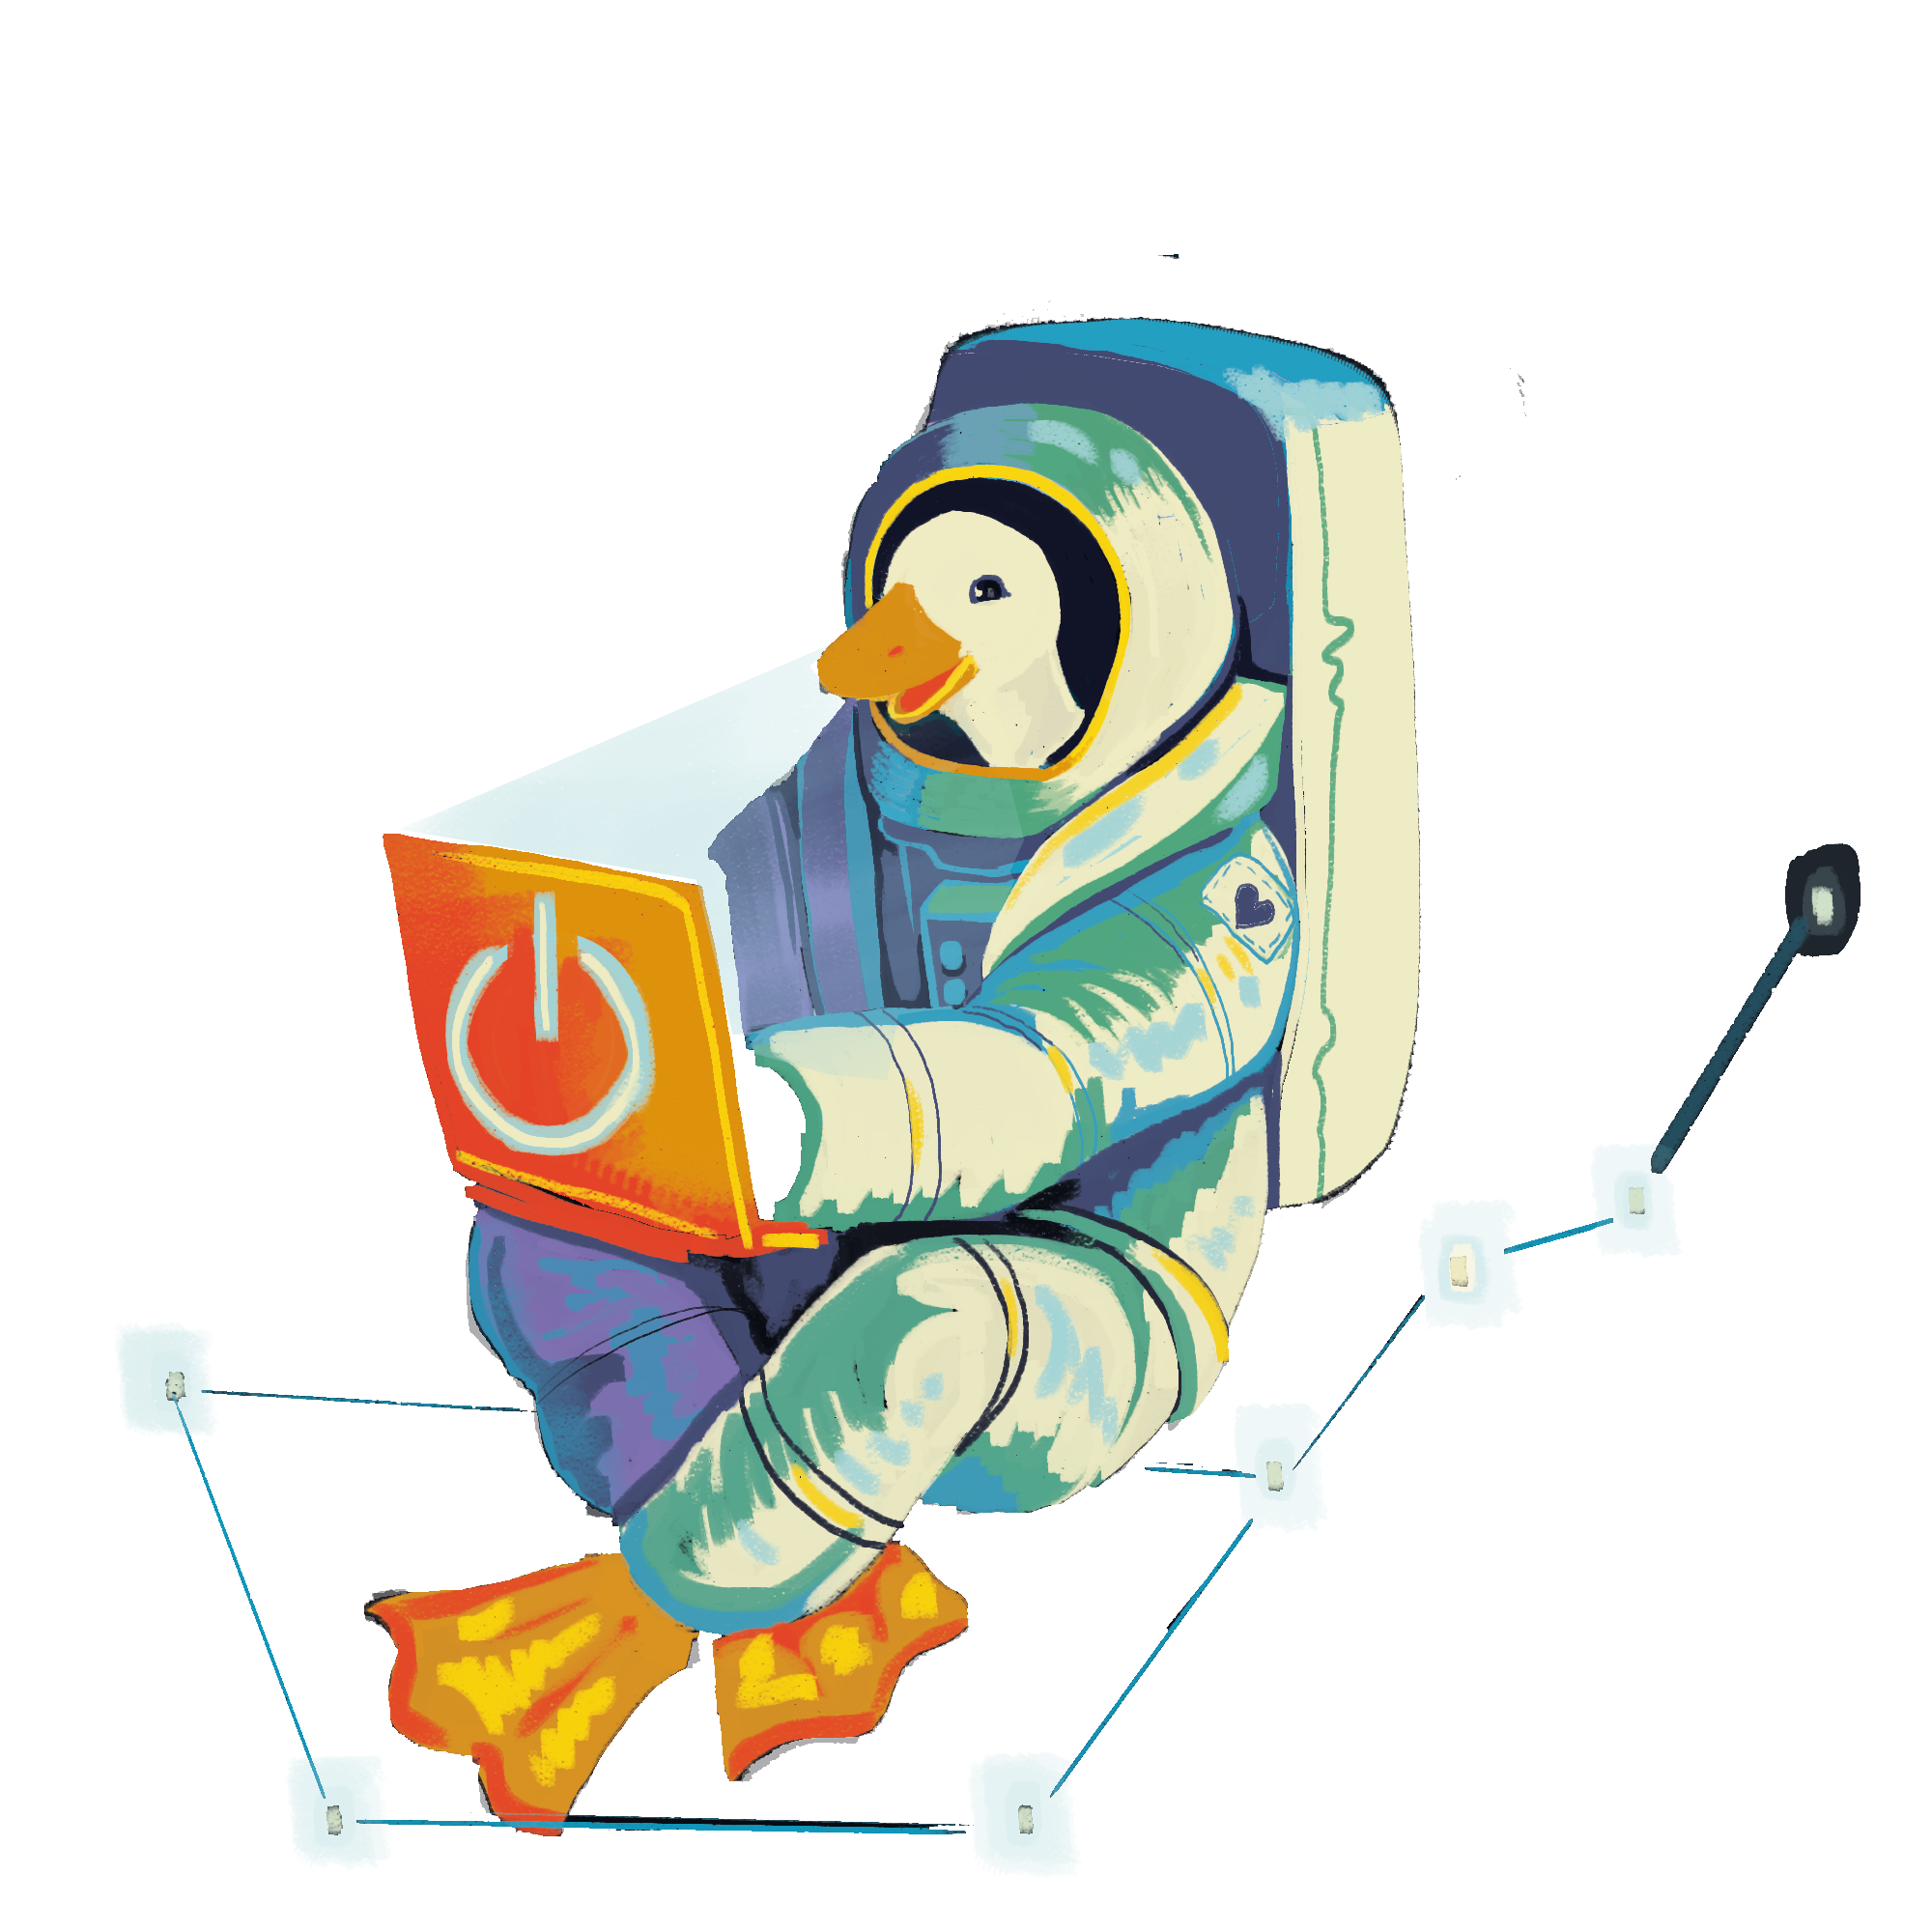 Spaceduck logo–which is a duck in an astronaut suit typing on a laptop